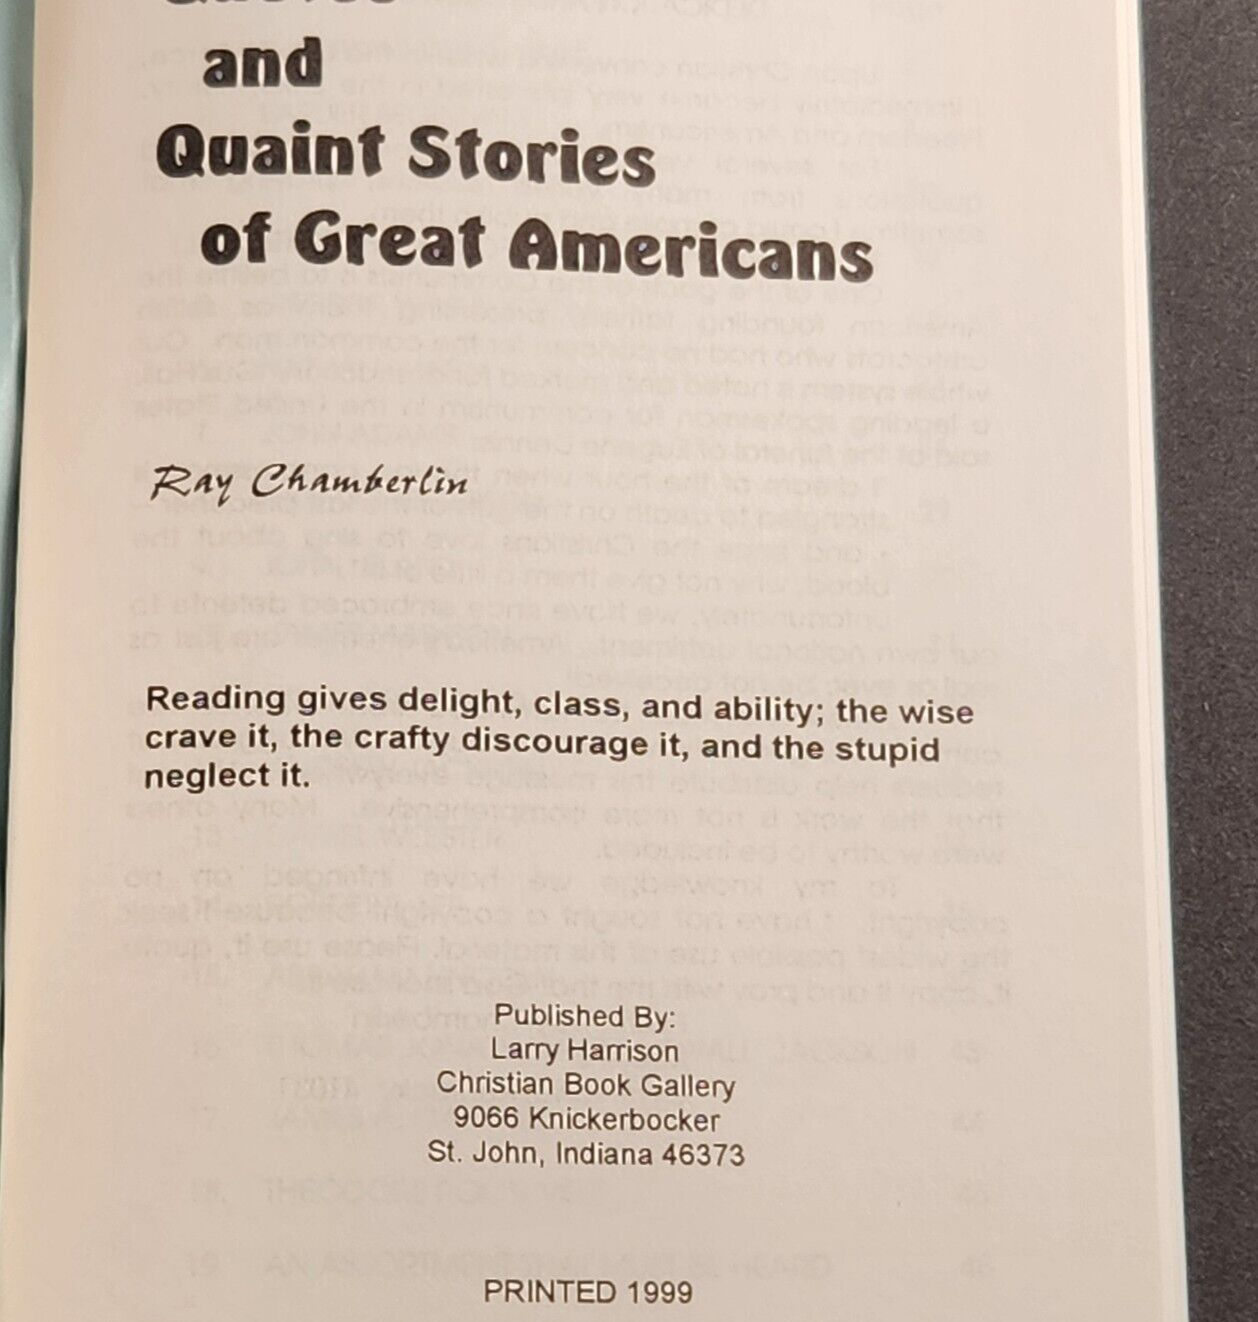 Quotes and Quaint Stories of Great Americans by Ray Chamberlin Vintage Paperback